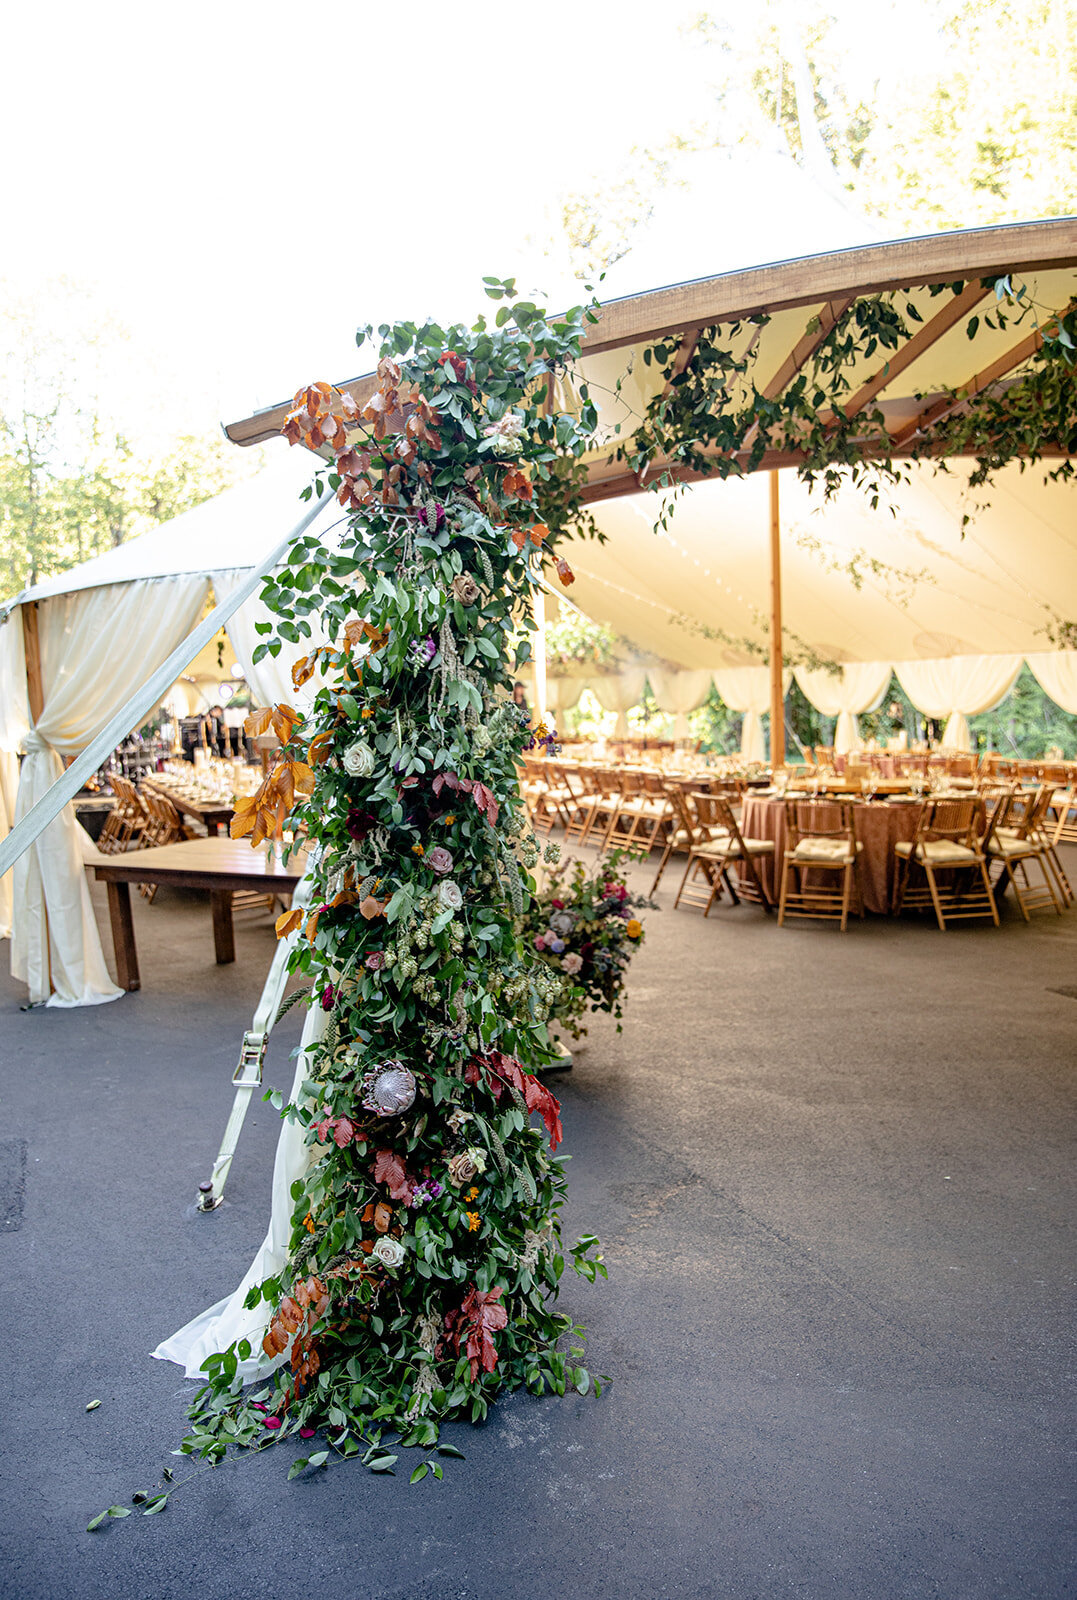 Tent entrance flower installation with lush vines, hops, fruiting pomegranate branches, greenery, wildflowers in shades of pink, mauve, copper, golden yellow, and soft blue. RT Lodge luxury wedding floral designer.